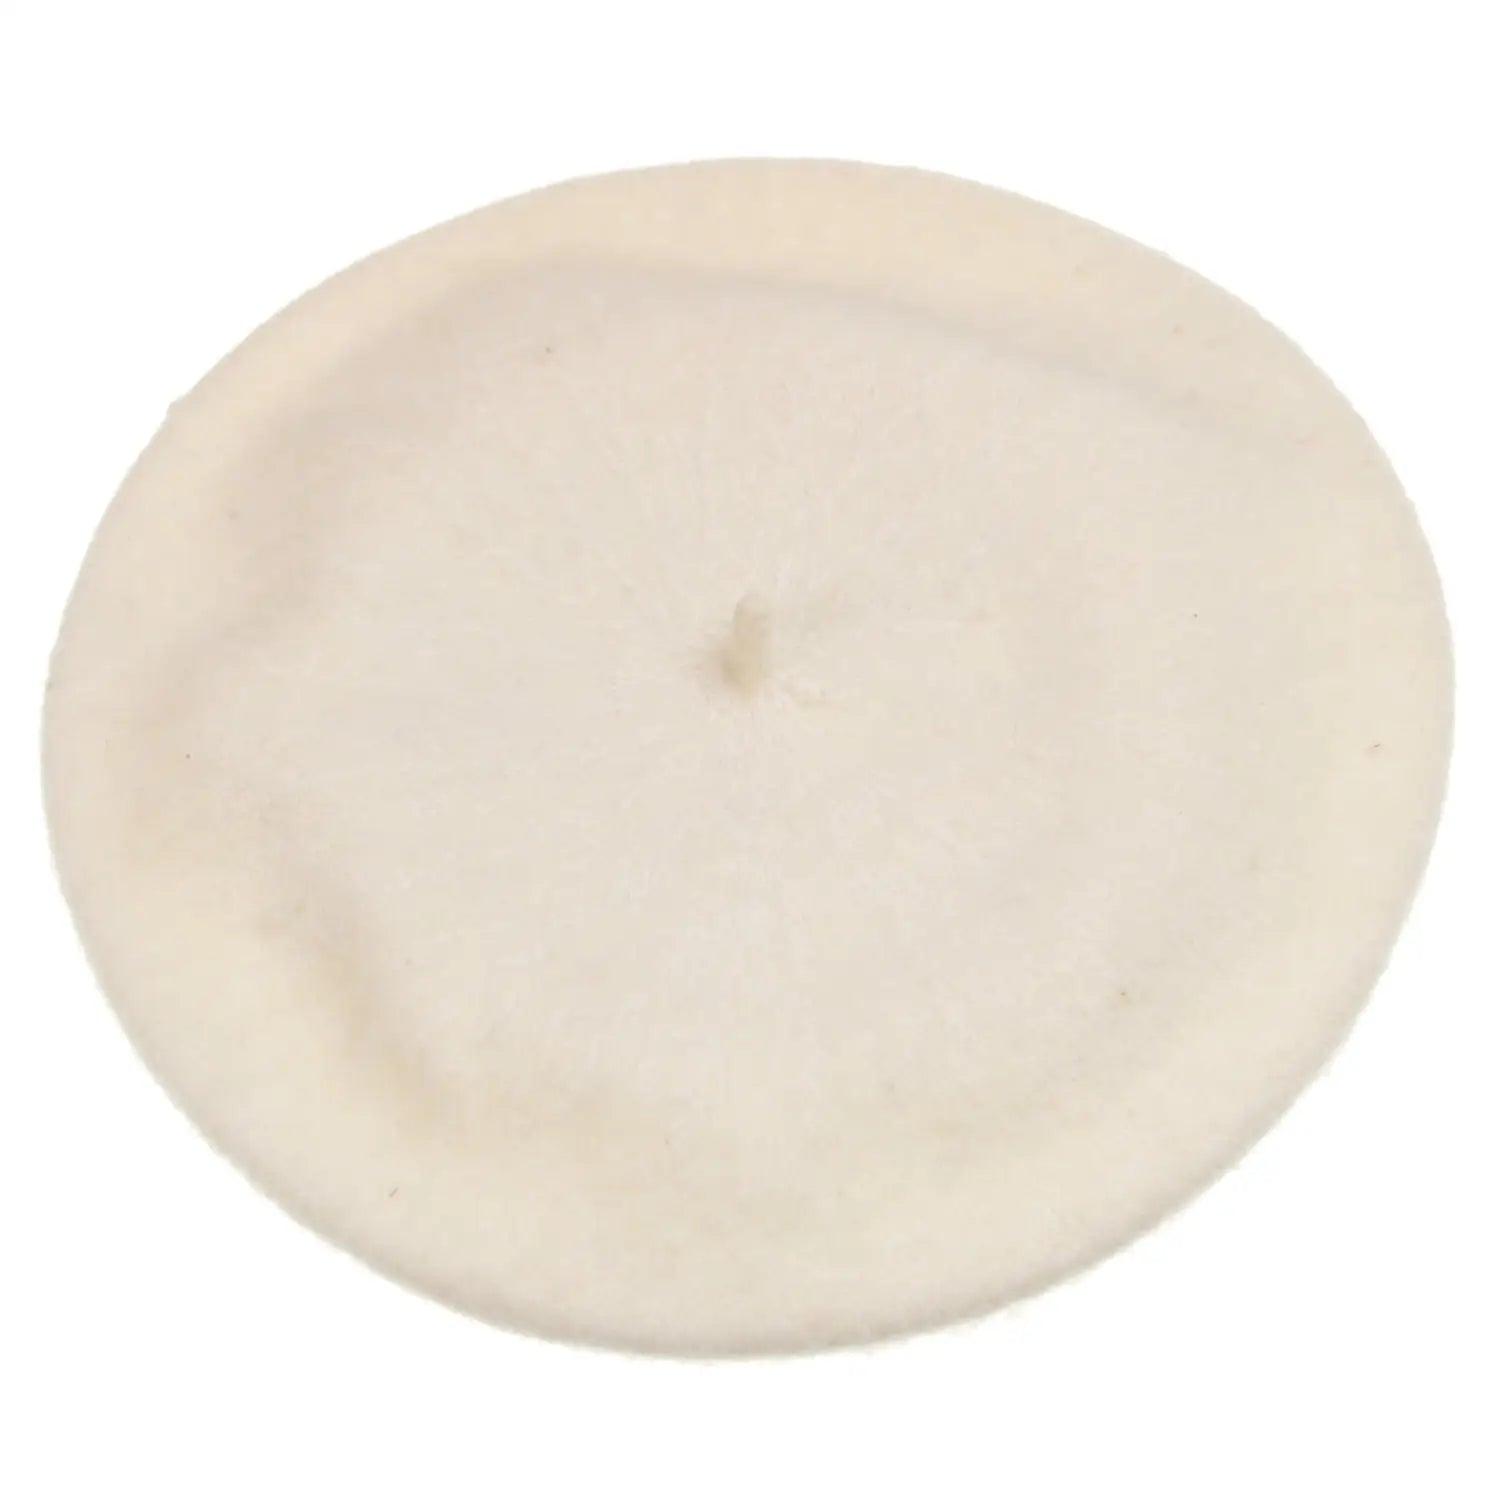 White French wool beret with round shape